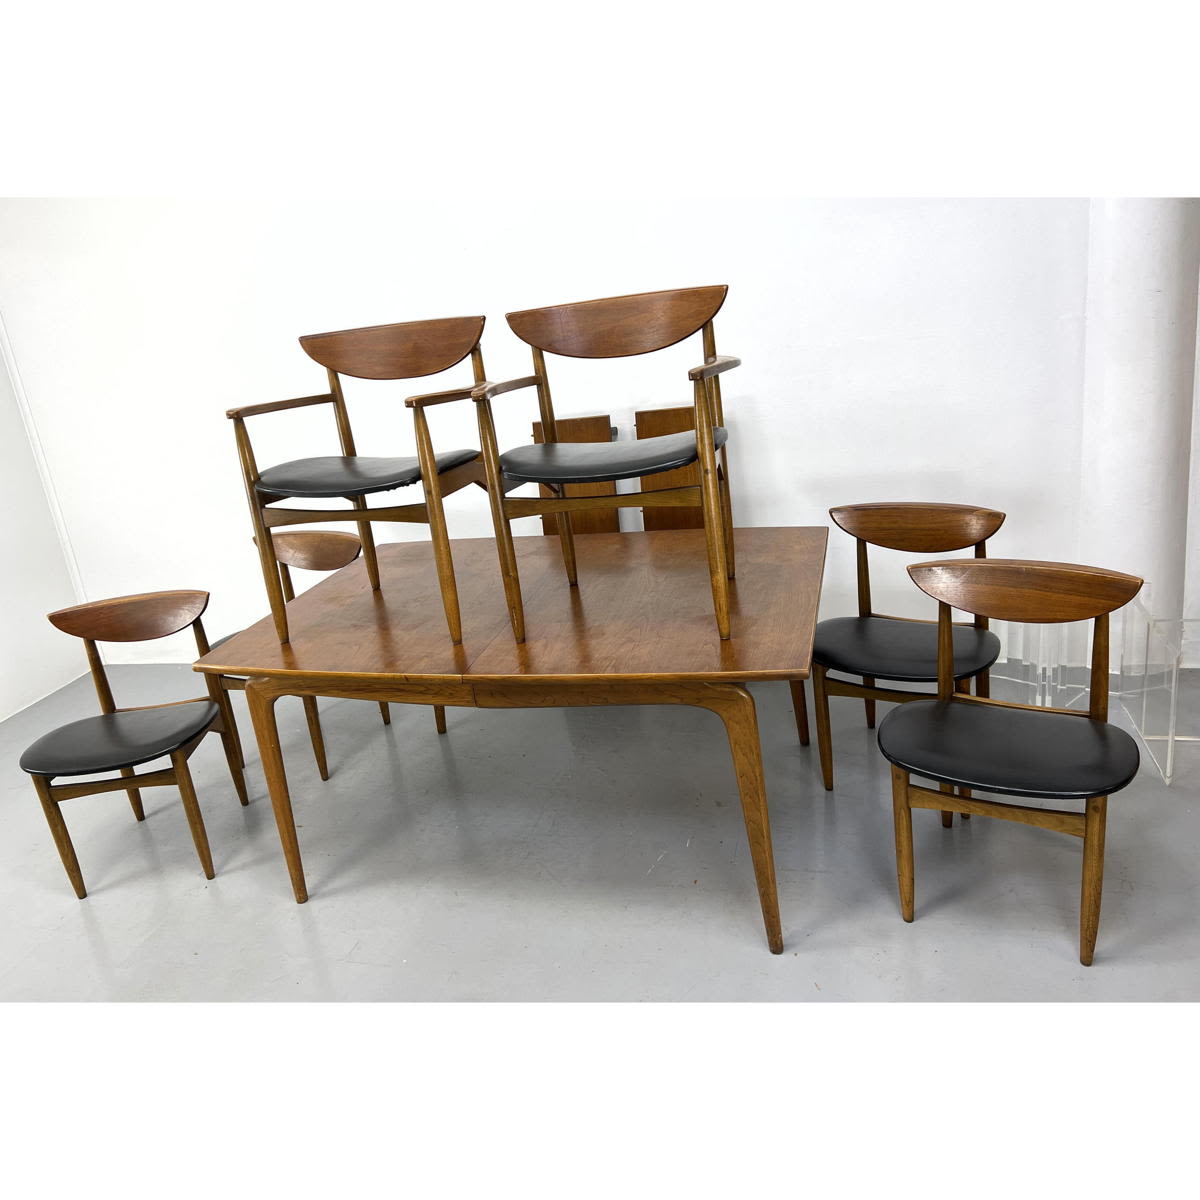 LANE walnut dining table and 6